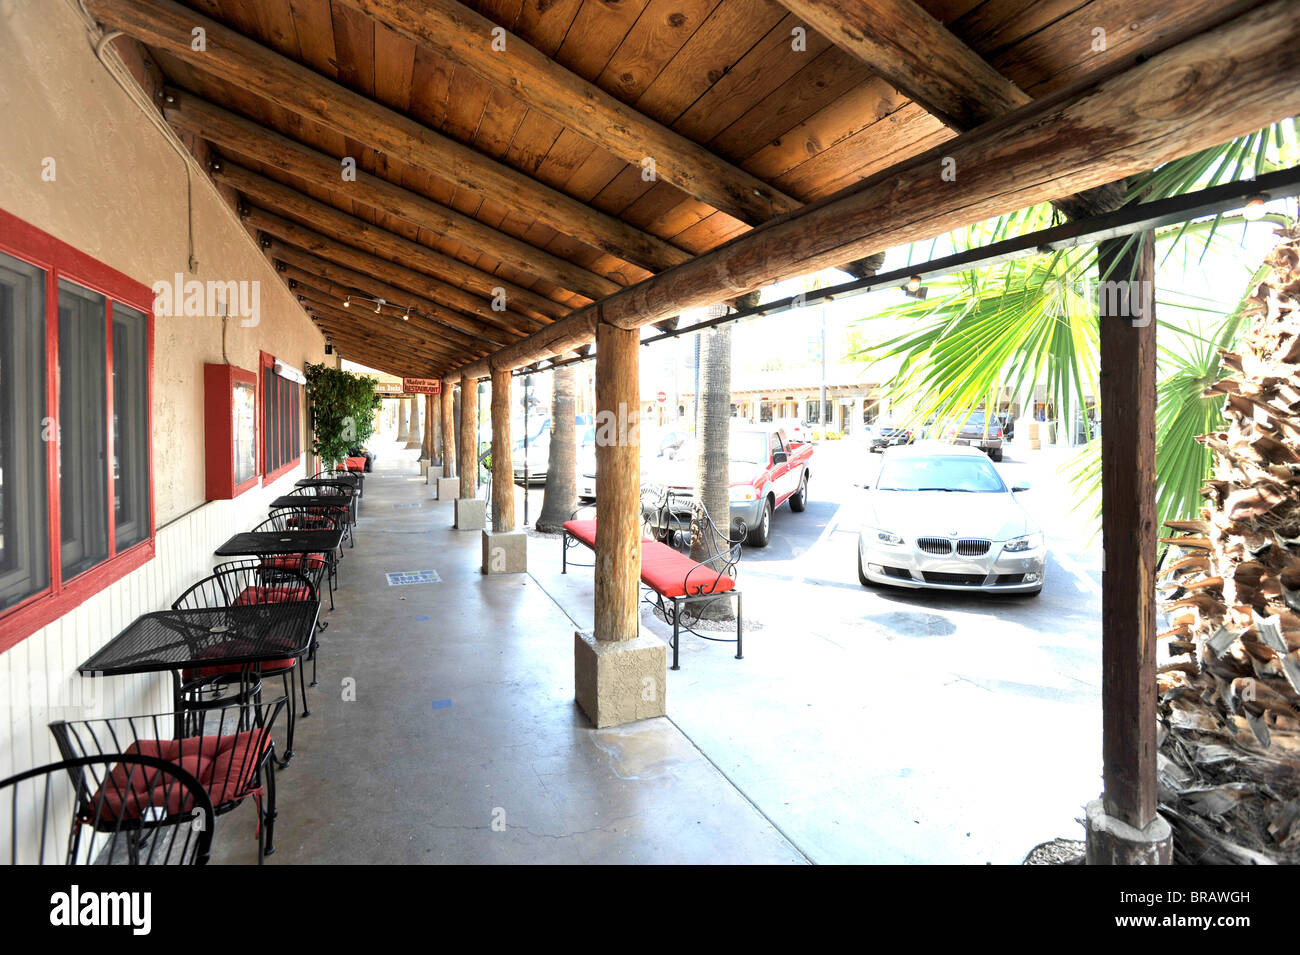 Part of a retail complex in Arizona includes a large wooden shade verandah Stock Photo